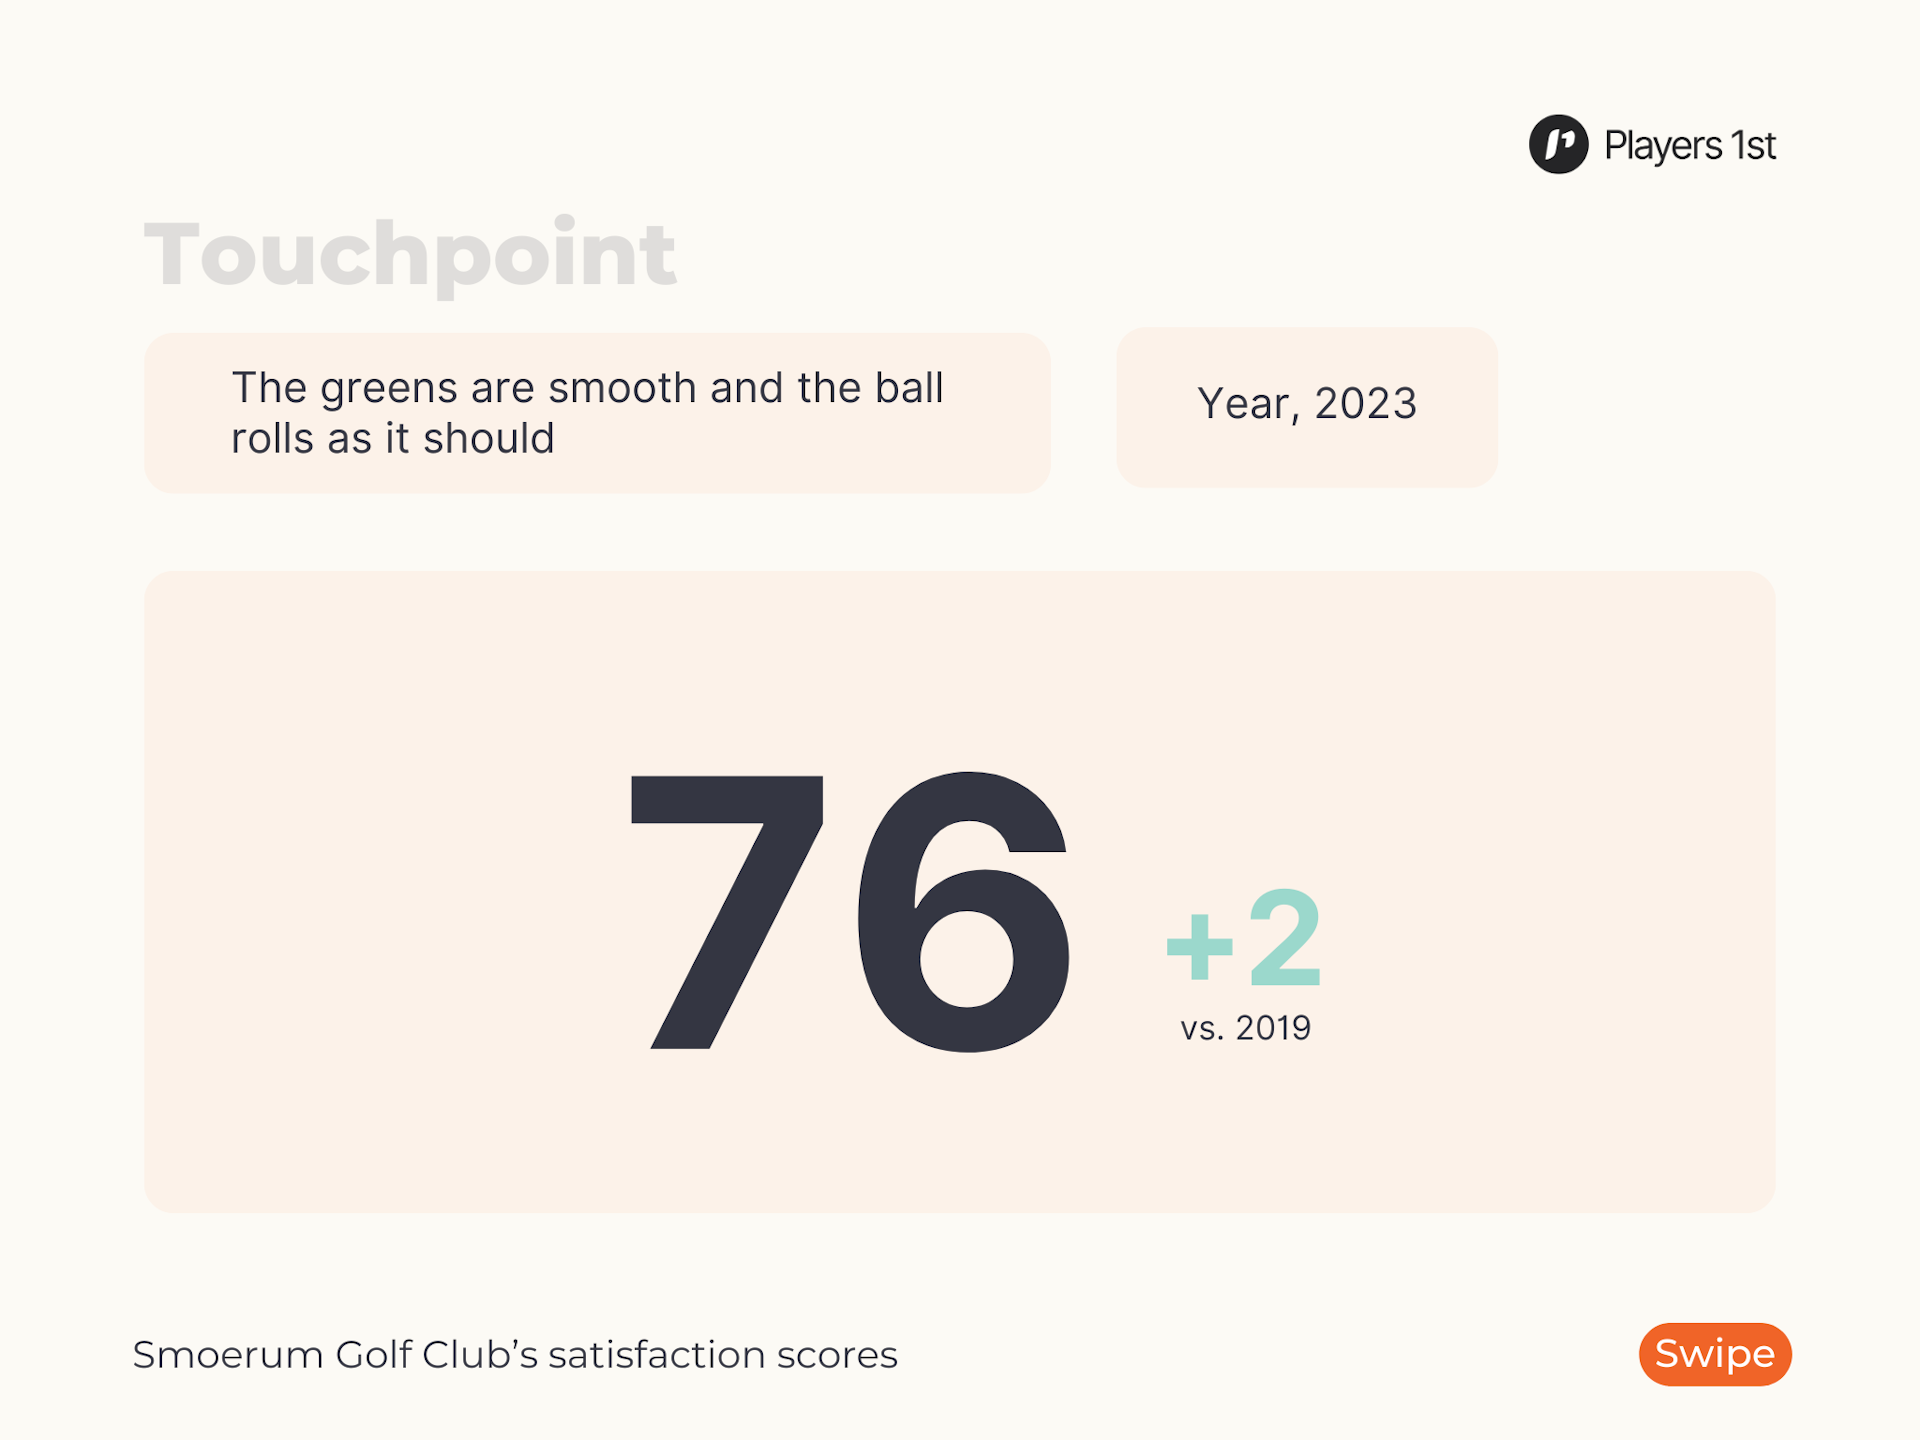 Touchpoint: The greens are smooth and the ball rolls as it should.